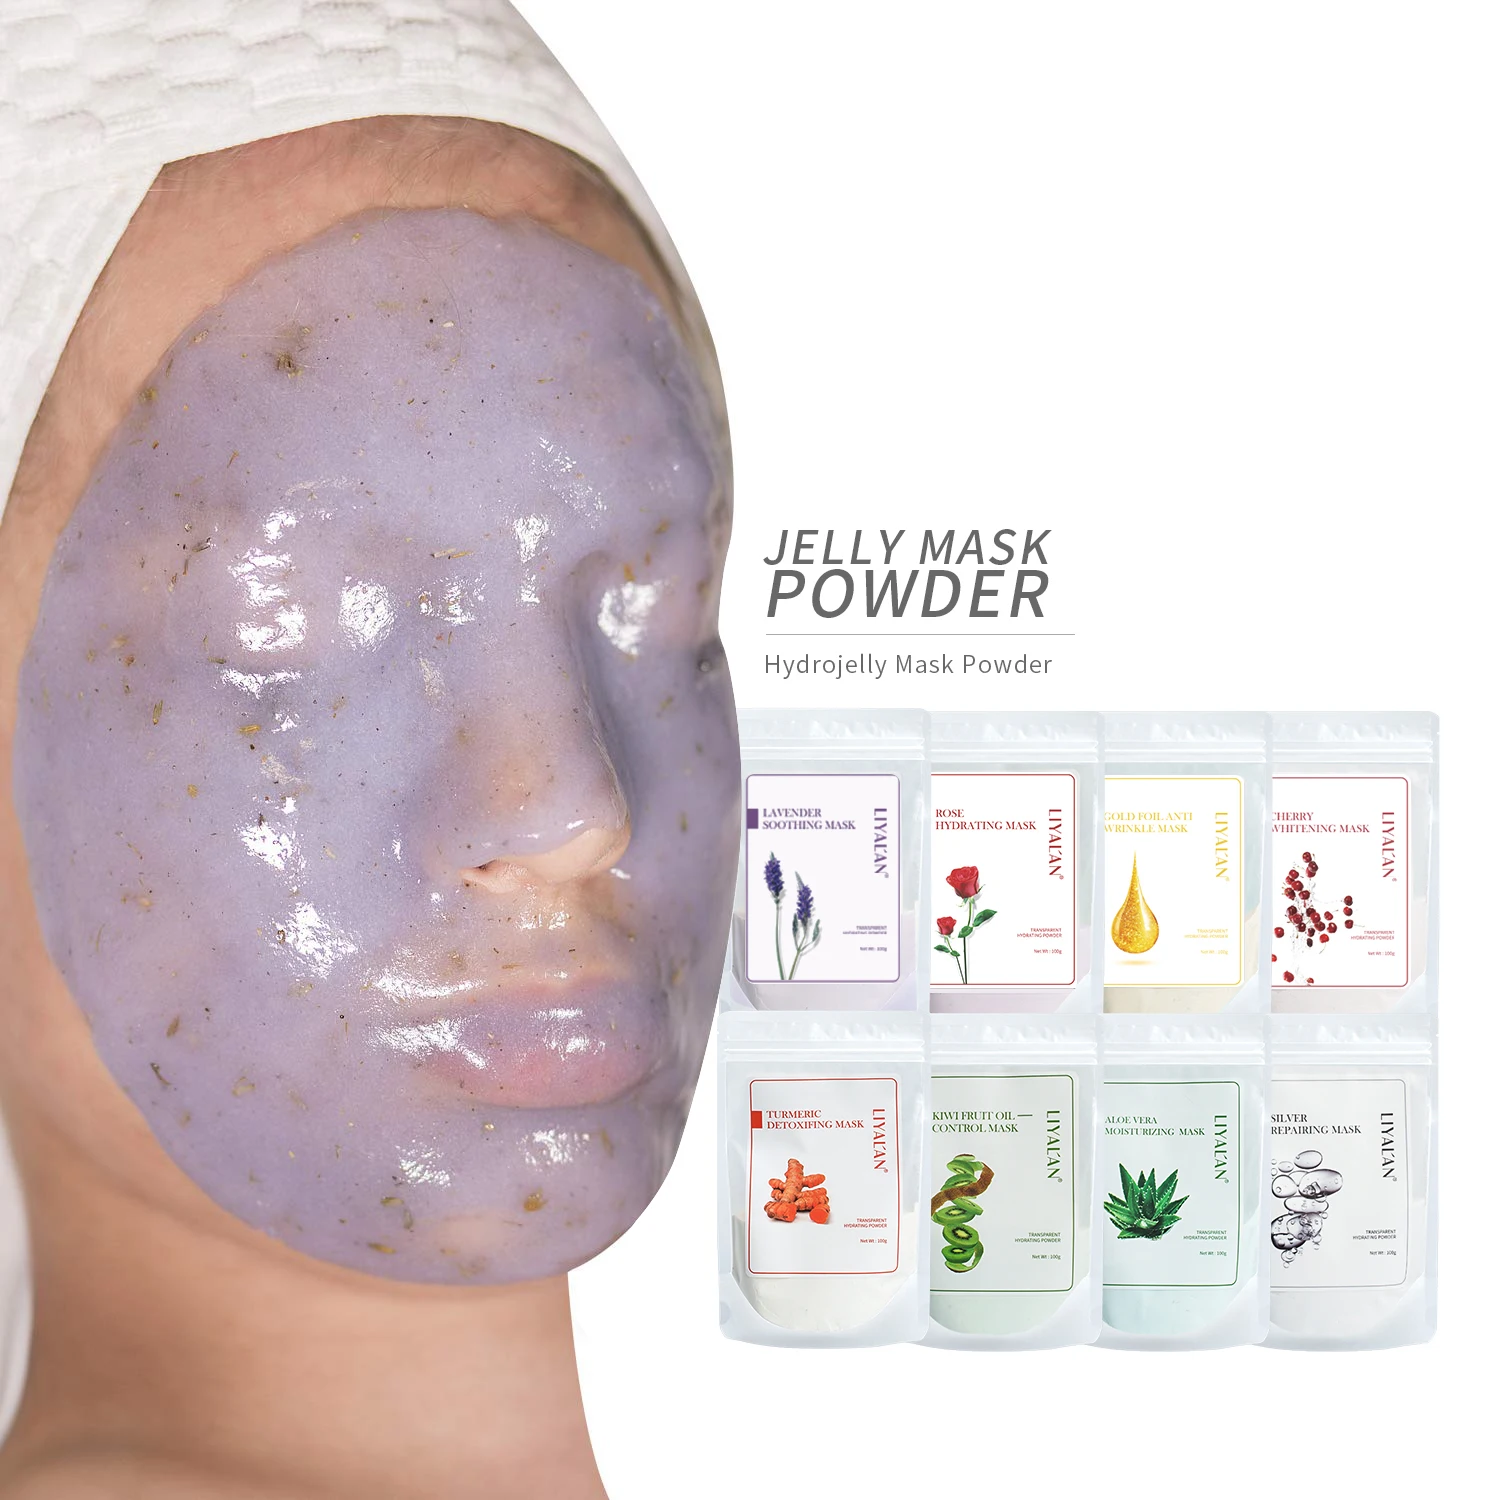 

Private Label Face & Body Mask Collagen Pore Cleansing Peel Off Skin Care Korea Rubber Facial Jelly Mask Powder